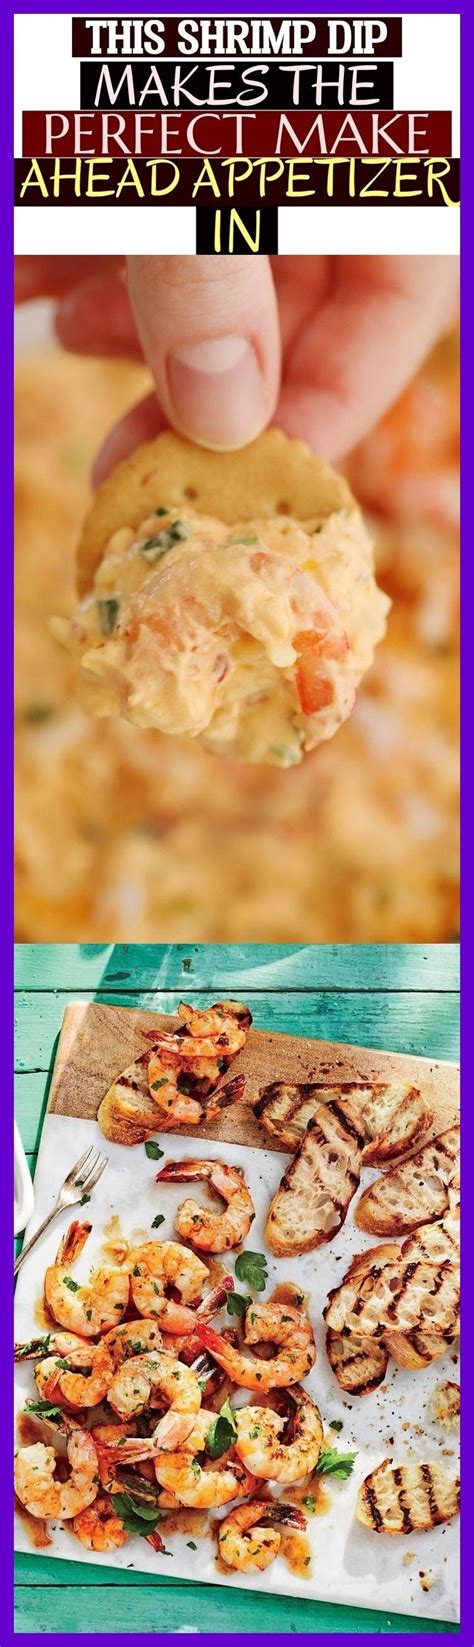 10 easy make ahead appetizers (many vegetarian) that look impressive, taste great and take less than 30 minutes to make. This Shrimp Dip Makes The Perfect Make Ahead Appetizer In ...